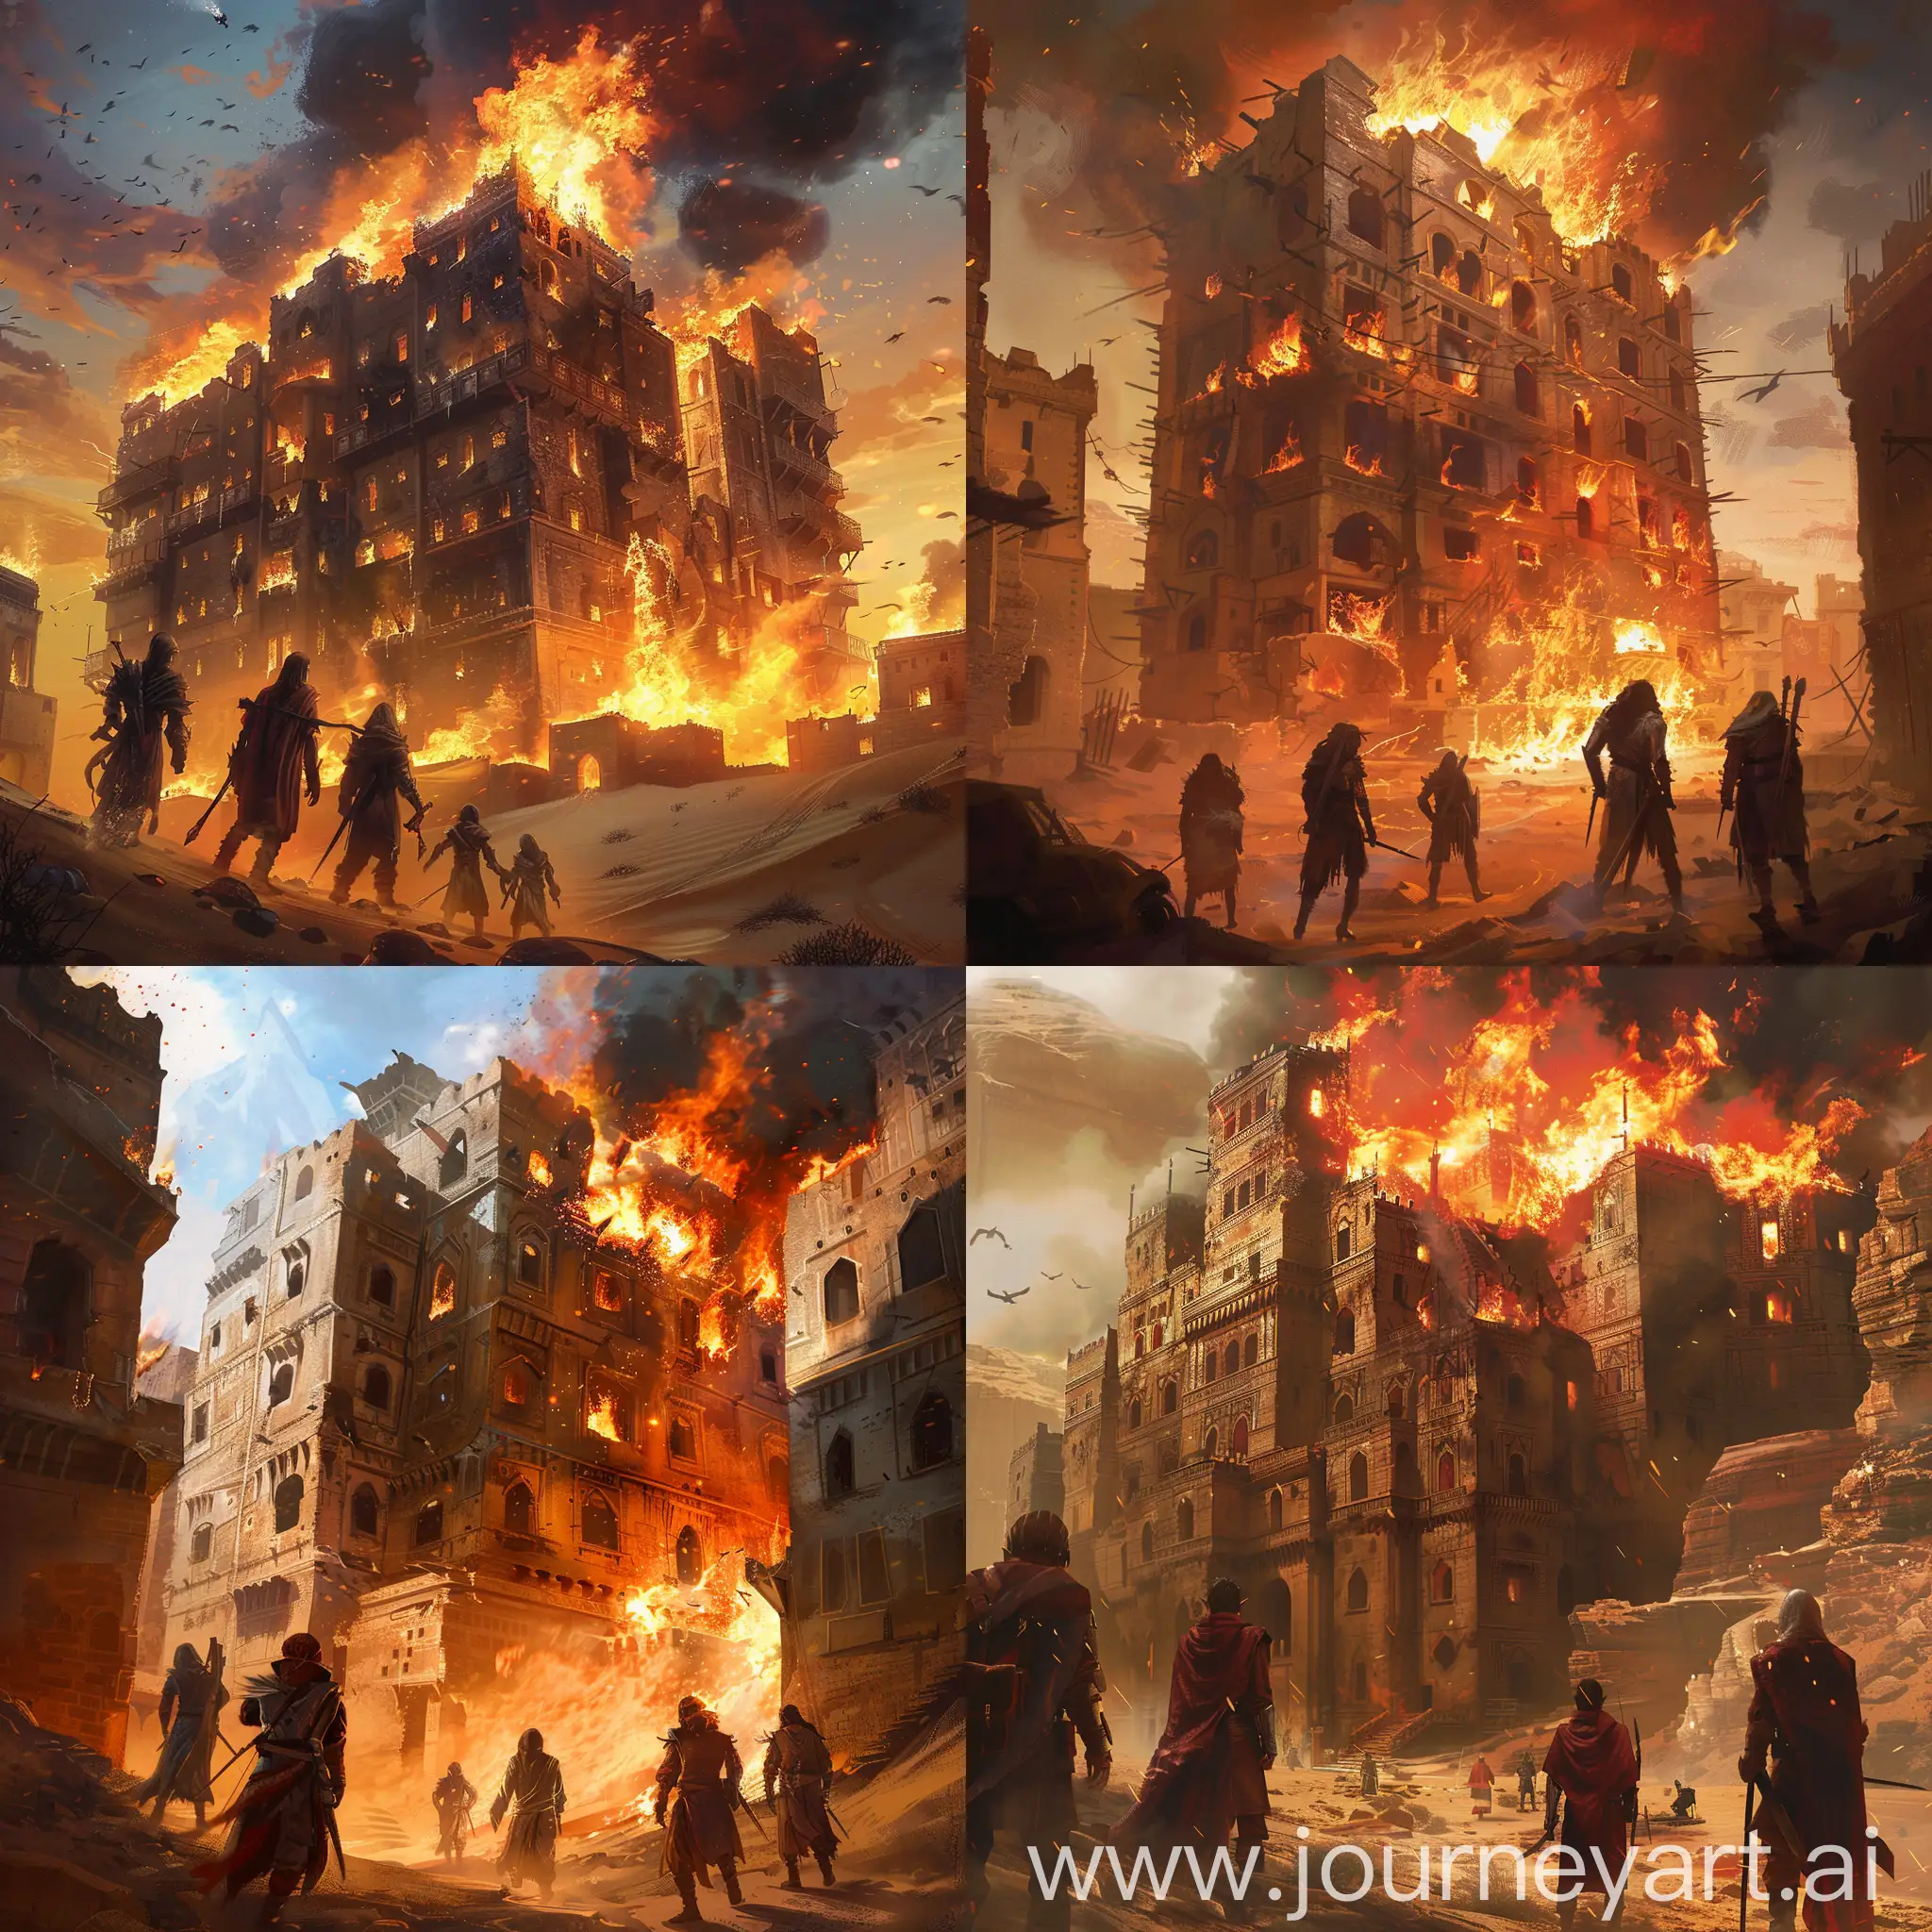 A burning building in a desert city slums with five adventurers watching it fantasy style